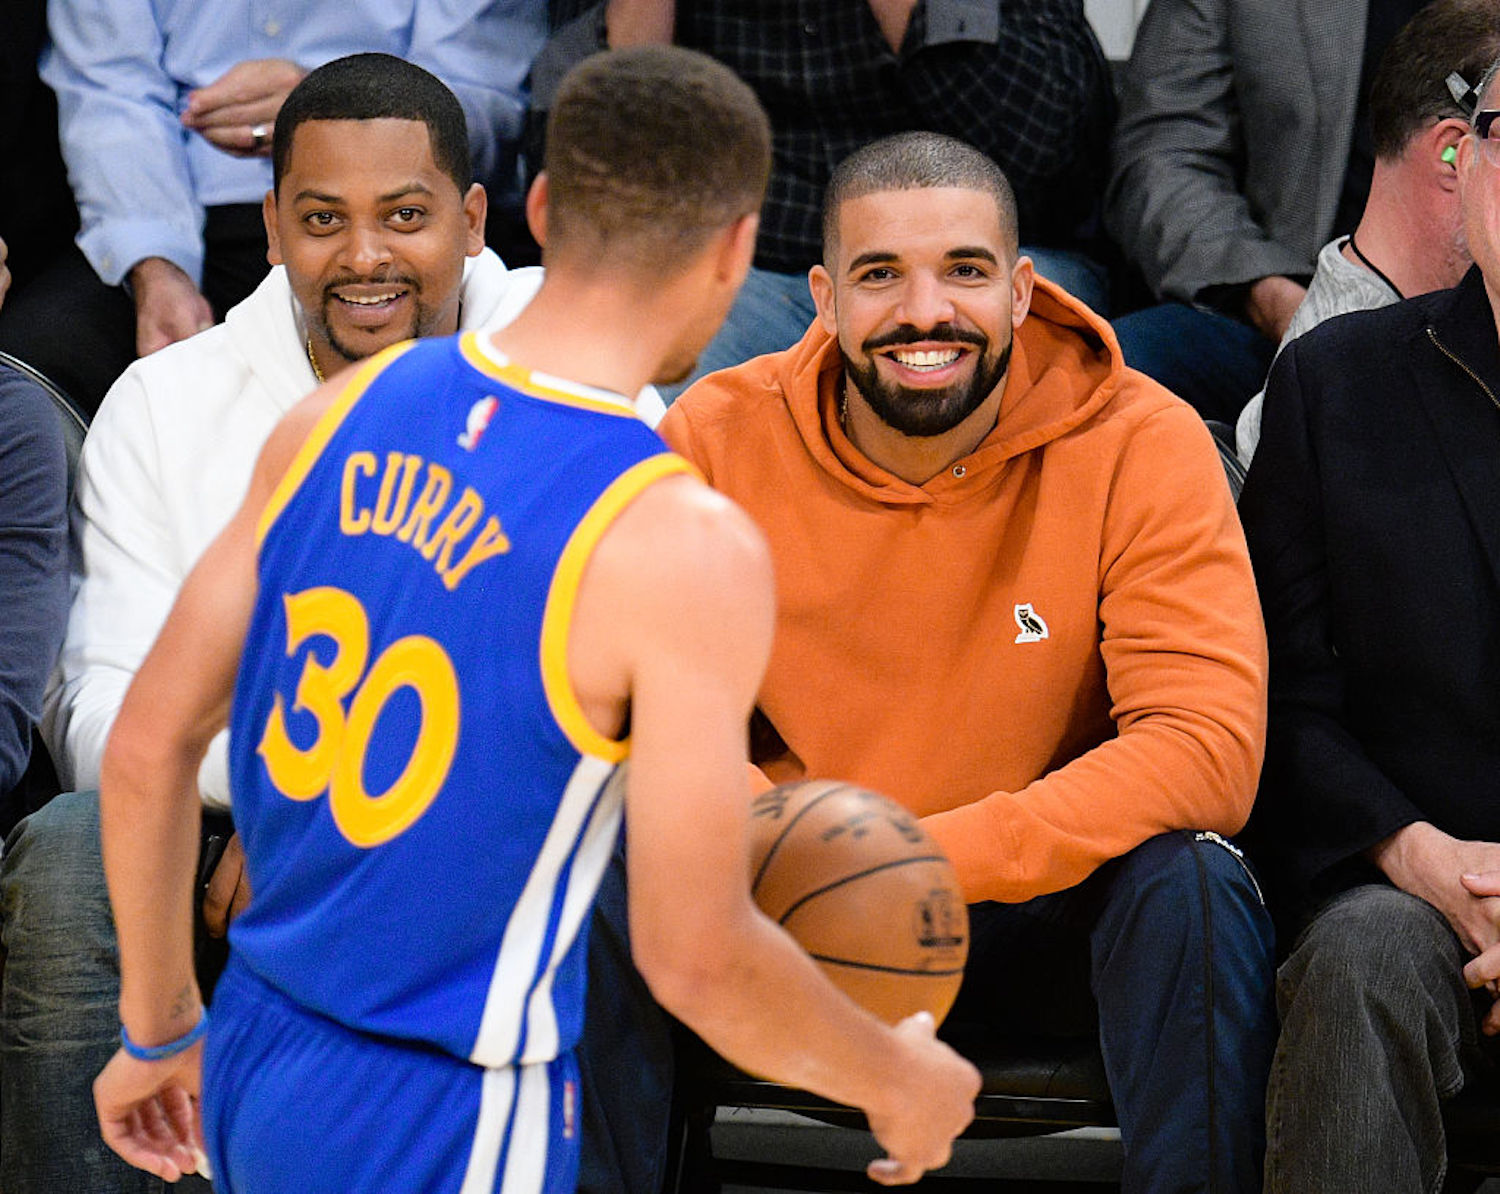 Steve Kerr dished out a $500 fine to famous rapper Drake after he made Stephen Curry and Draymond Green late to the team plane.